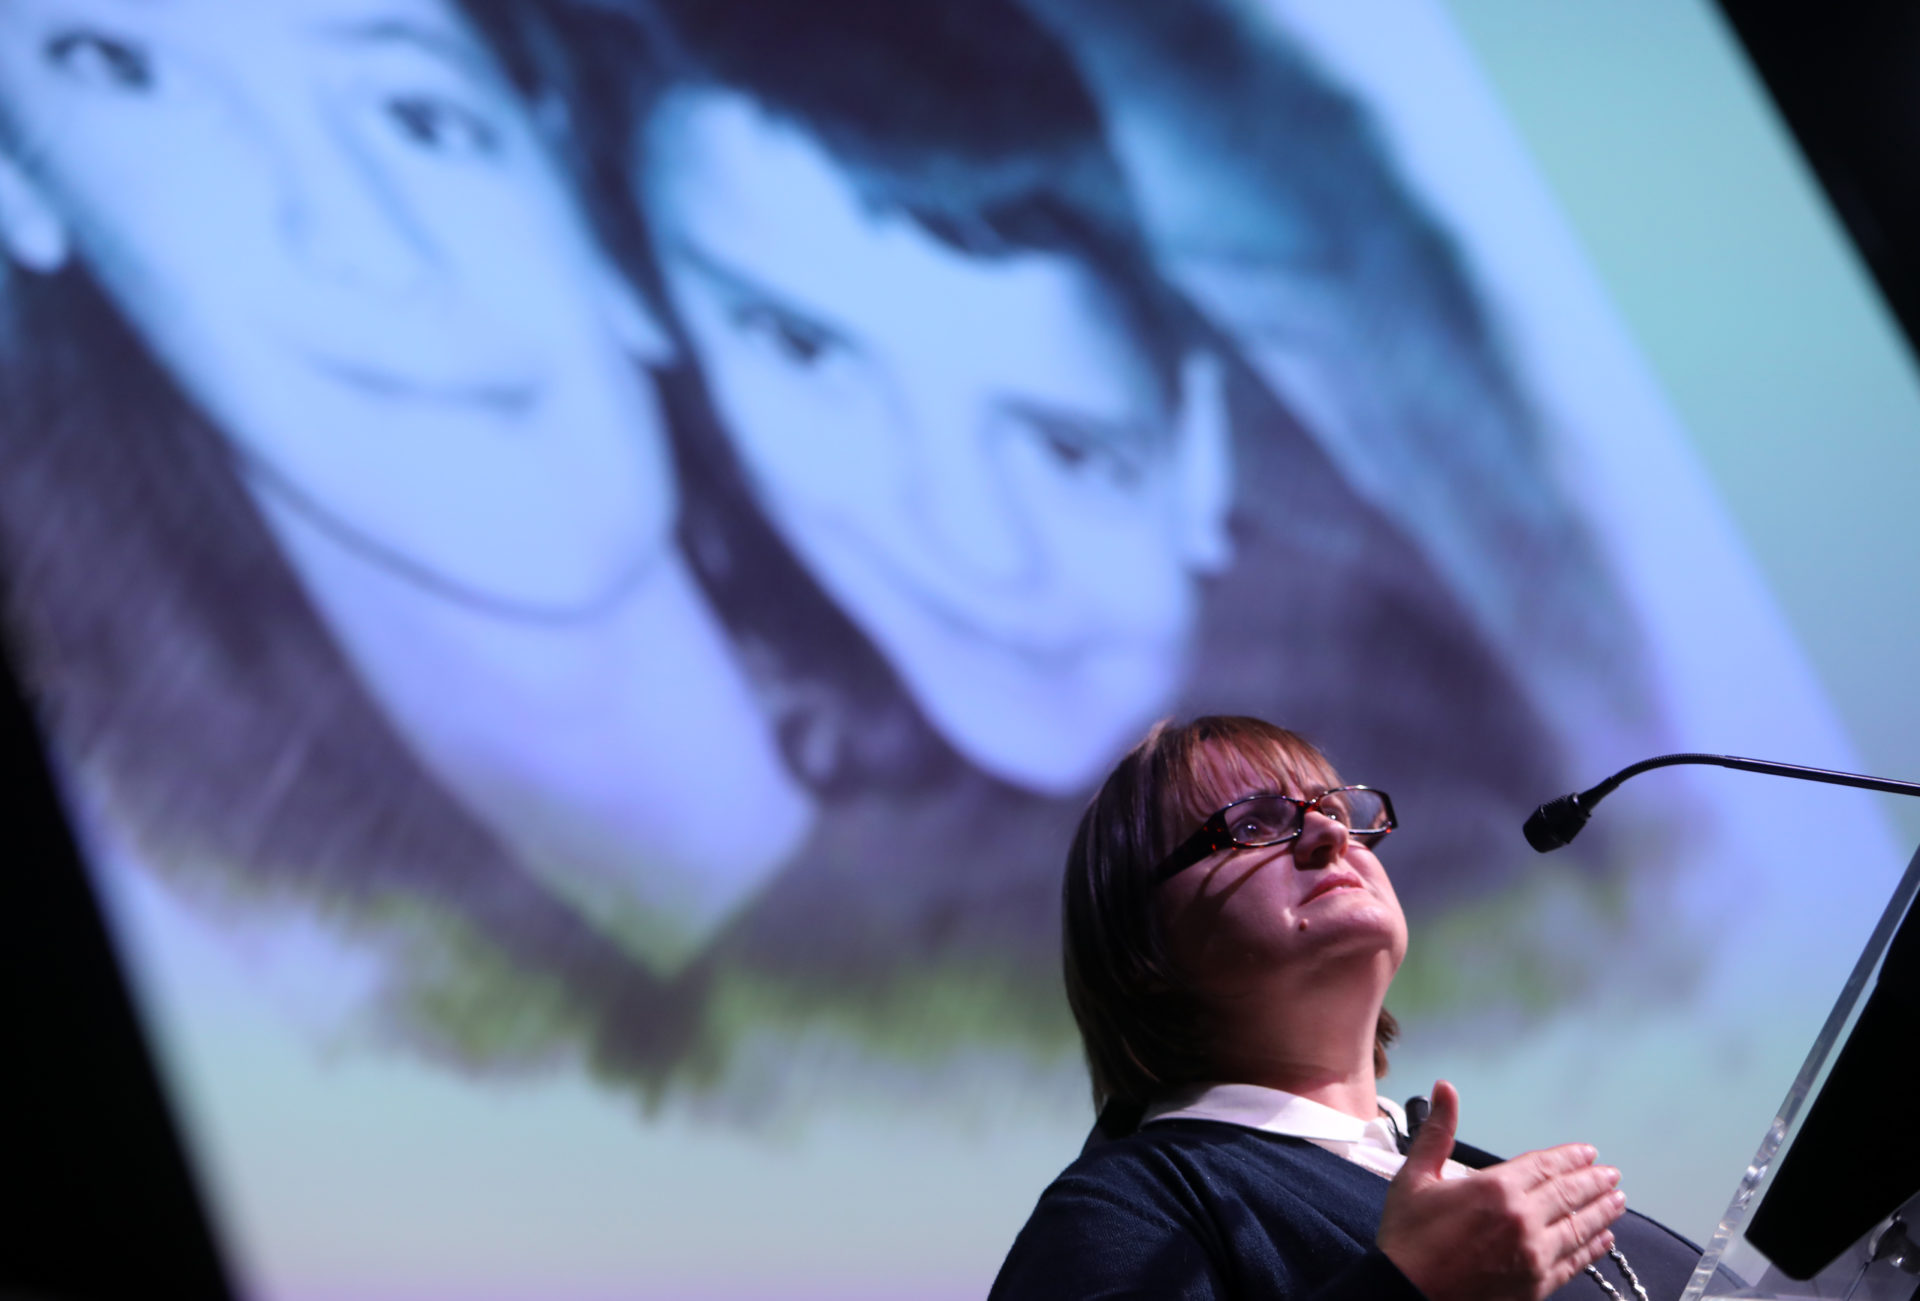 Kathleen Chada(L), mother of Eoghan and Ruairi Chada who were murdered by her husband Sanjeev Chada speaking at the Safe World Summit opening ceremony at Mansion House. 